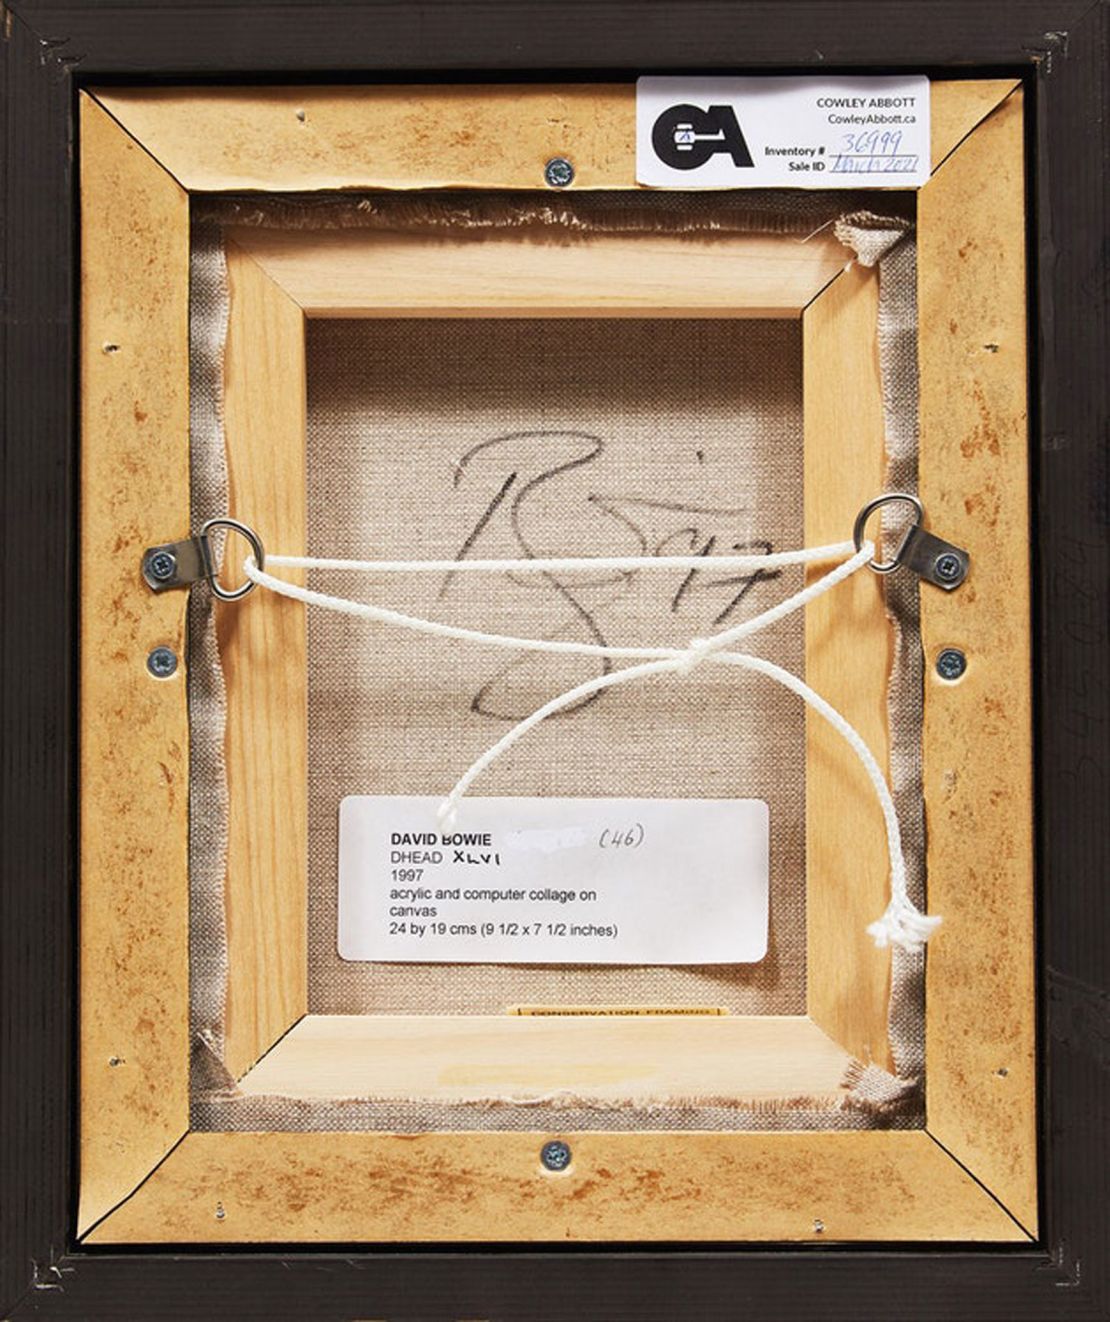 David Bowie's signature and an identifying label can be seen on the back of the painting.